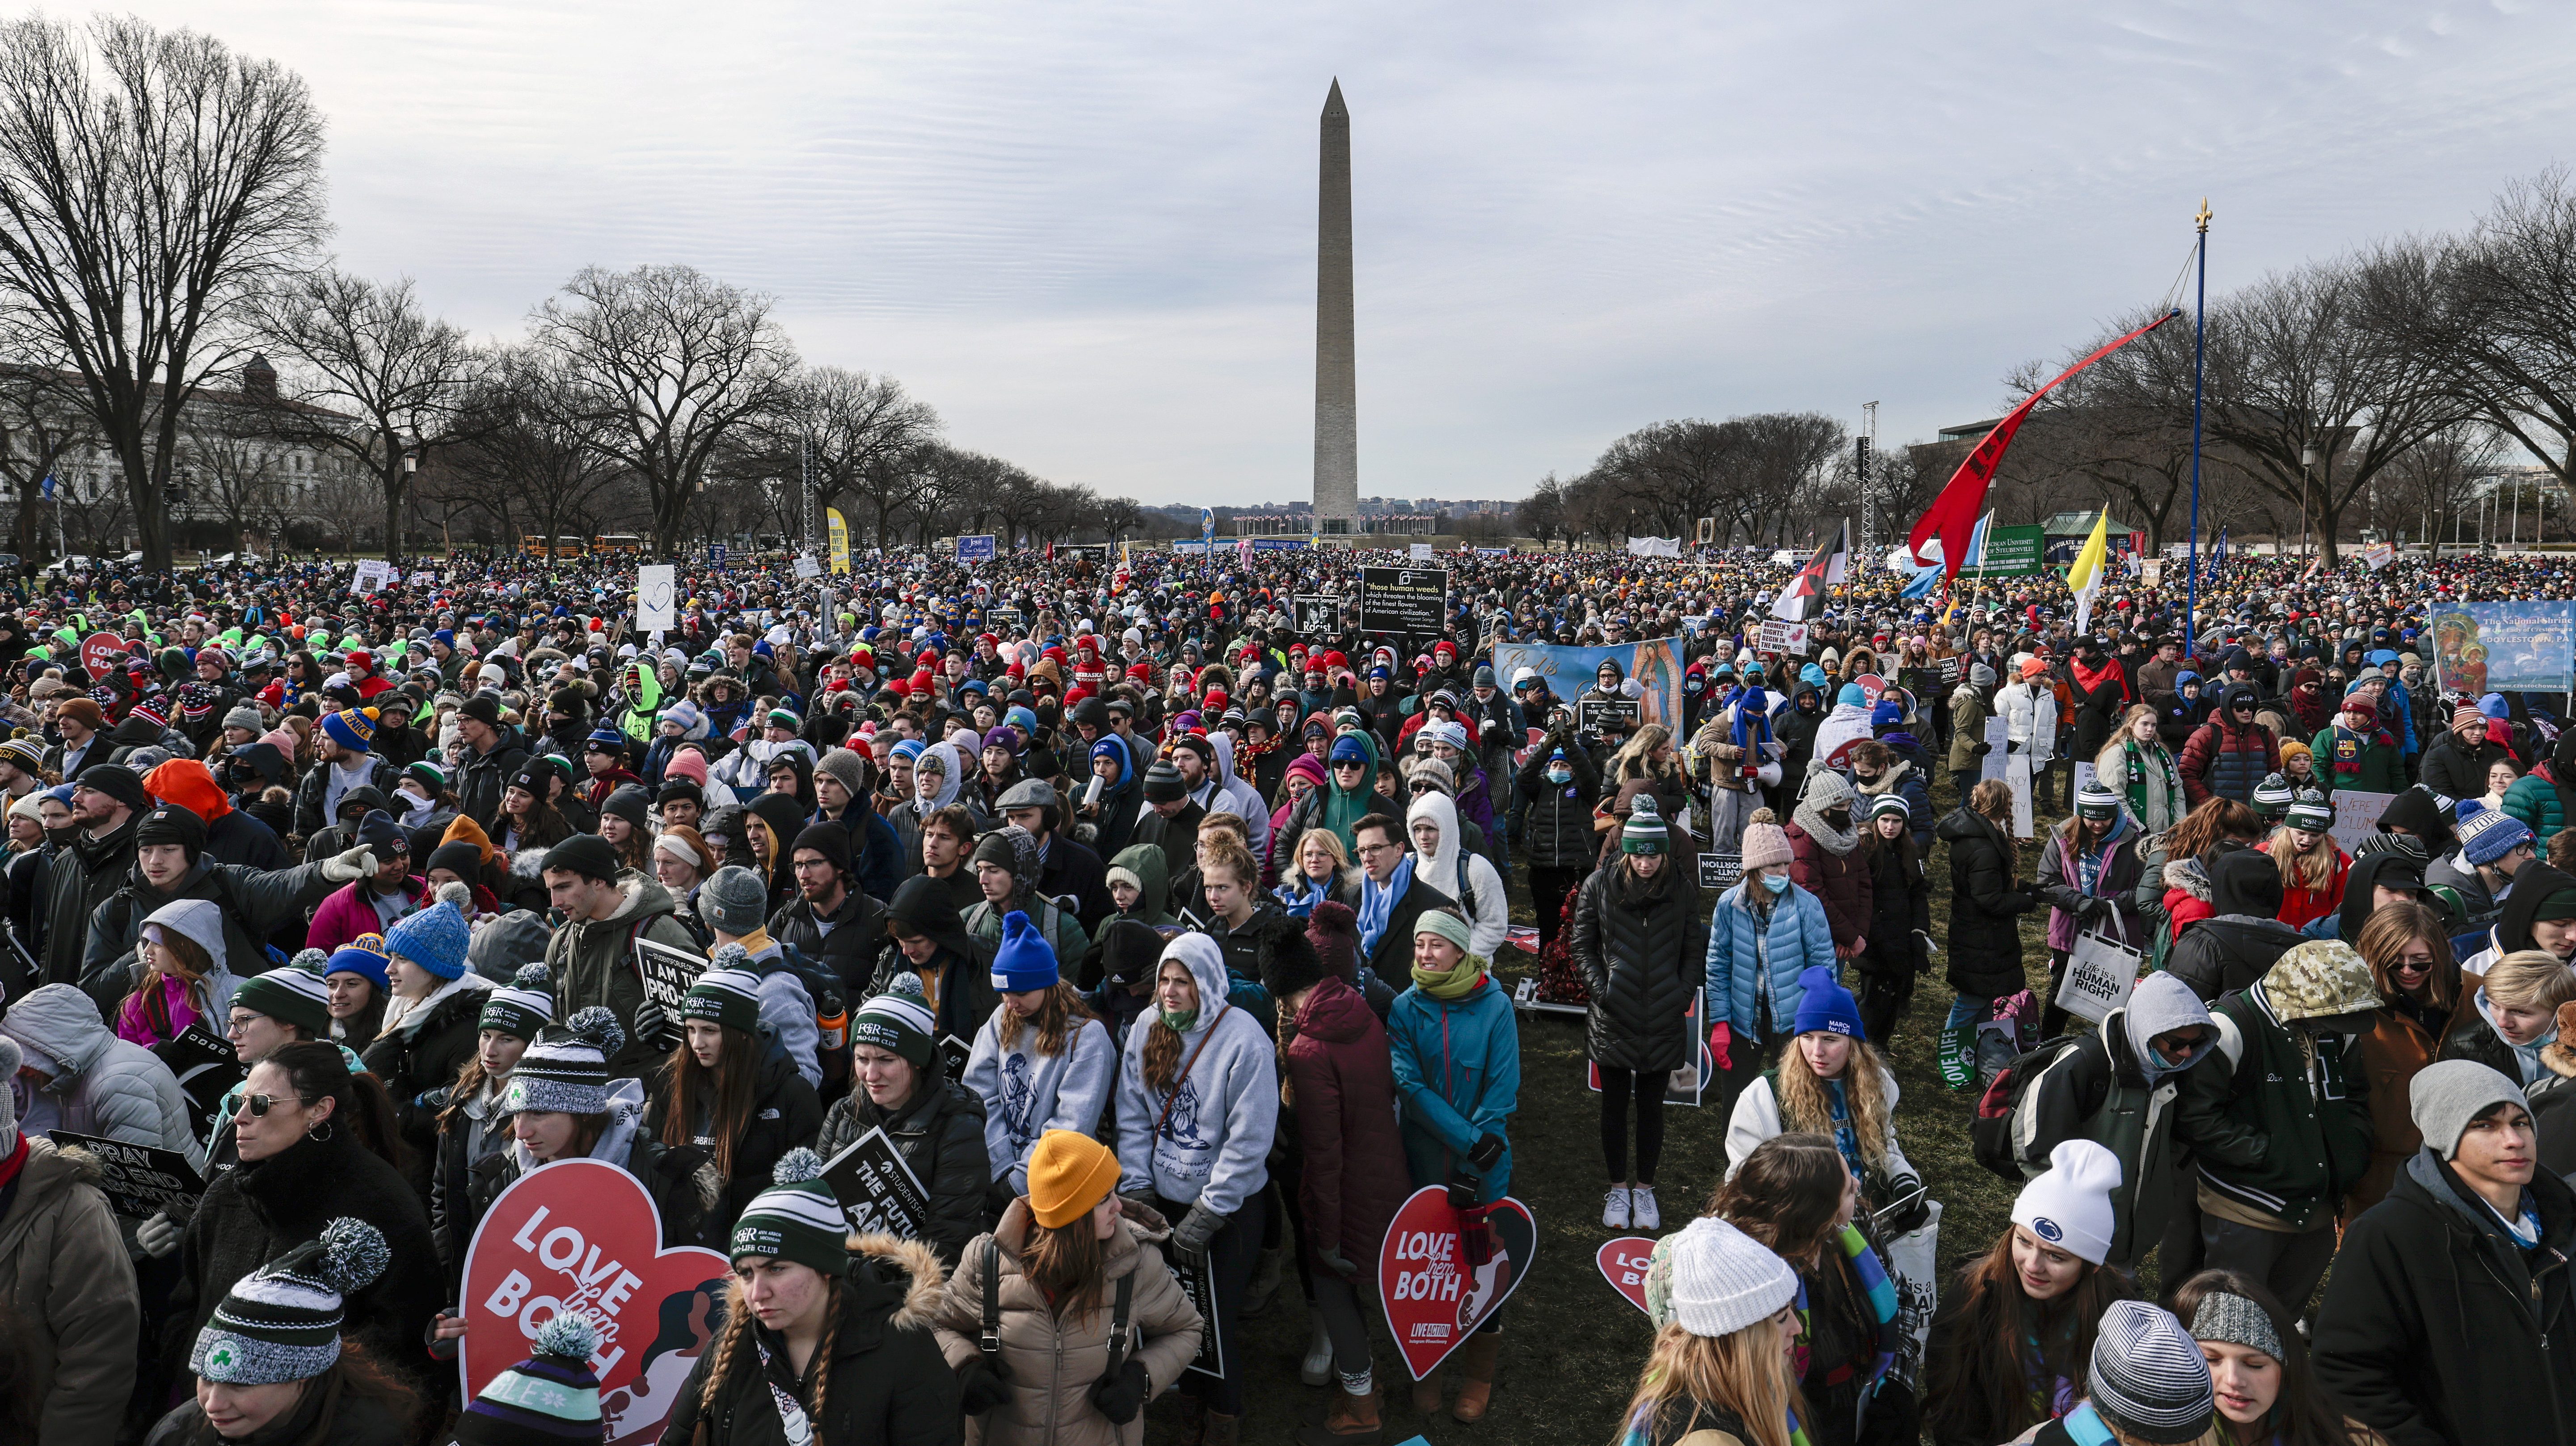 March For Life 2022 Schedule How Many Attended March For Life 2022? Crowd Photos Of Turnout | Heavy.com